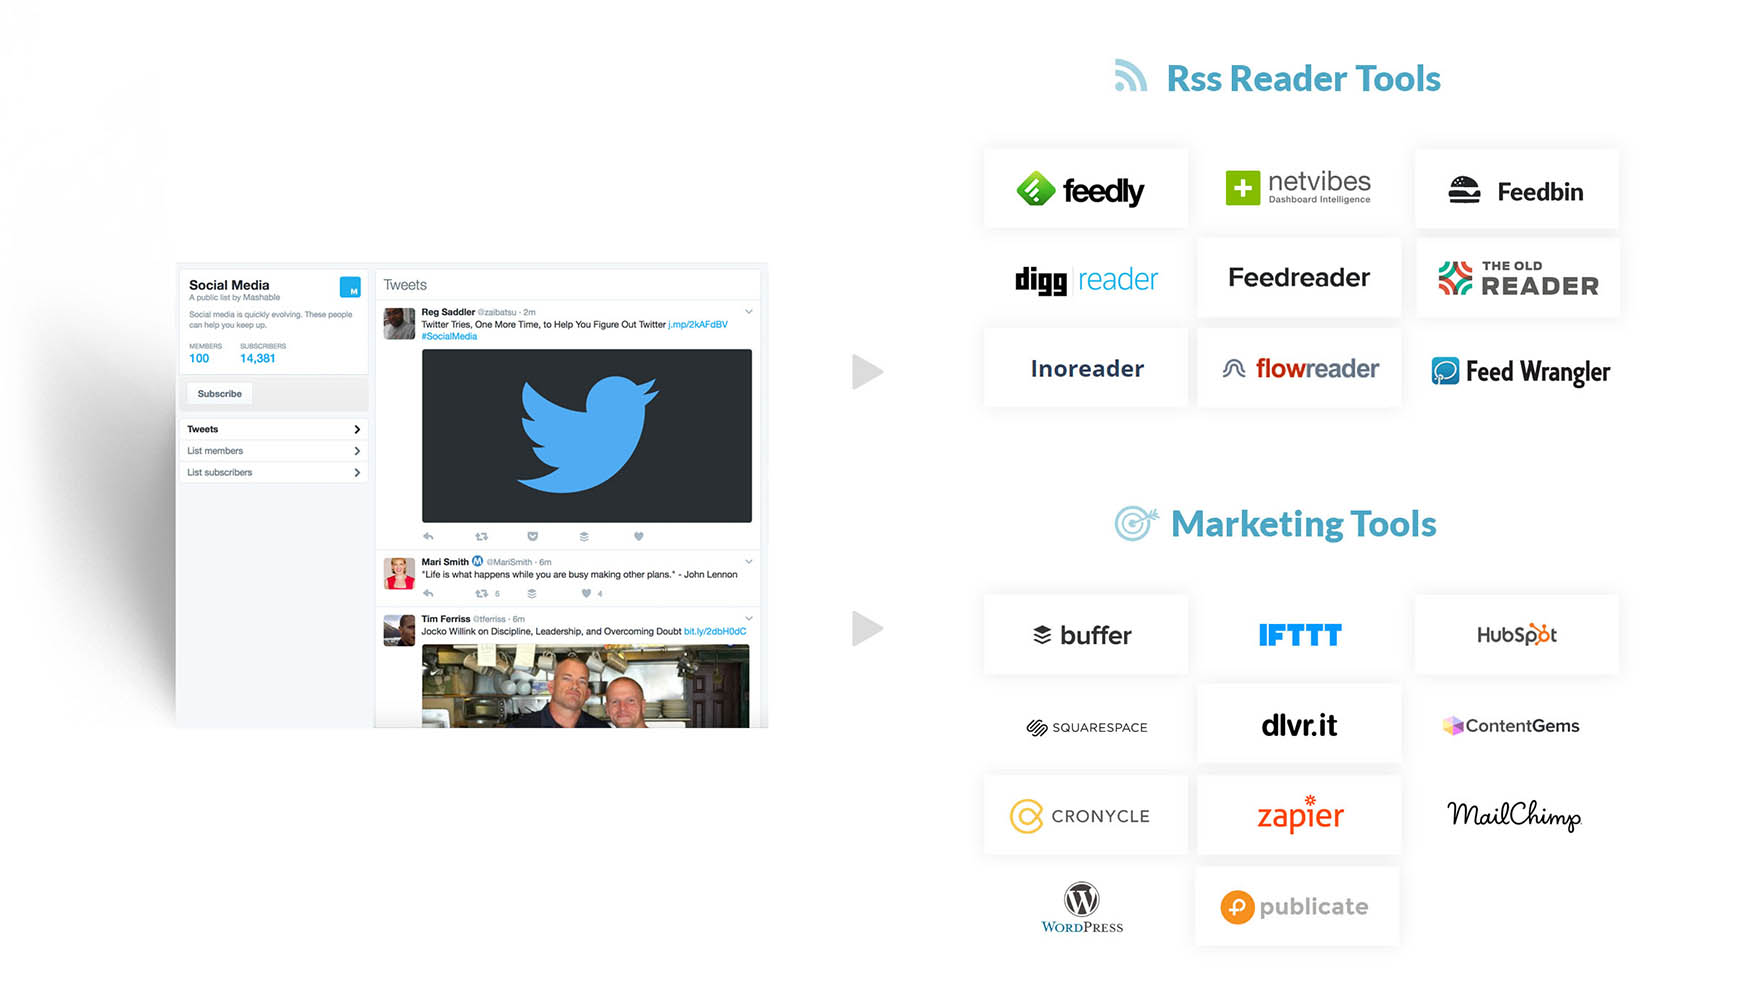 Twitter RSS Feed Tools